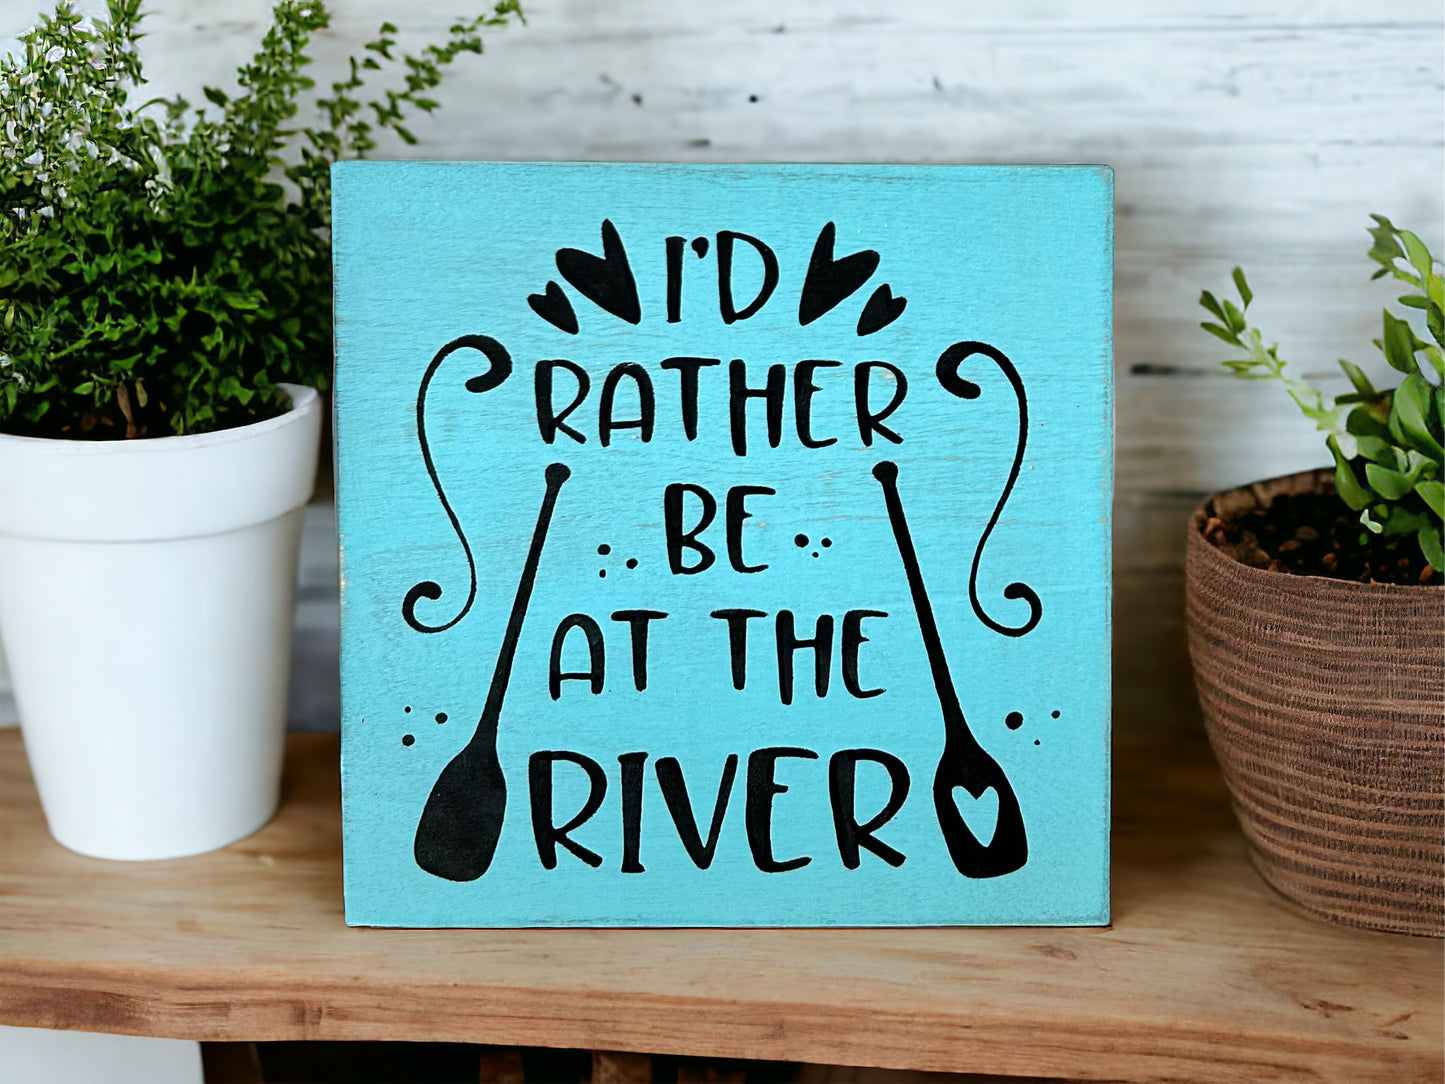 Rather be at the River - Rustic Wood Shelf Sitter